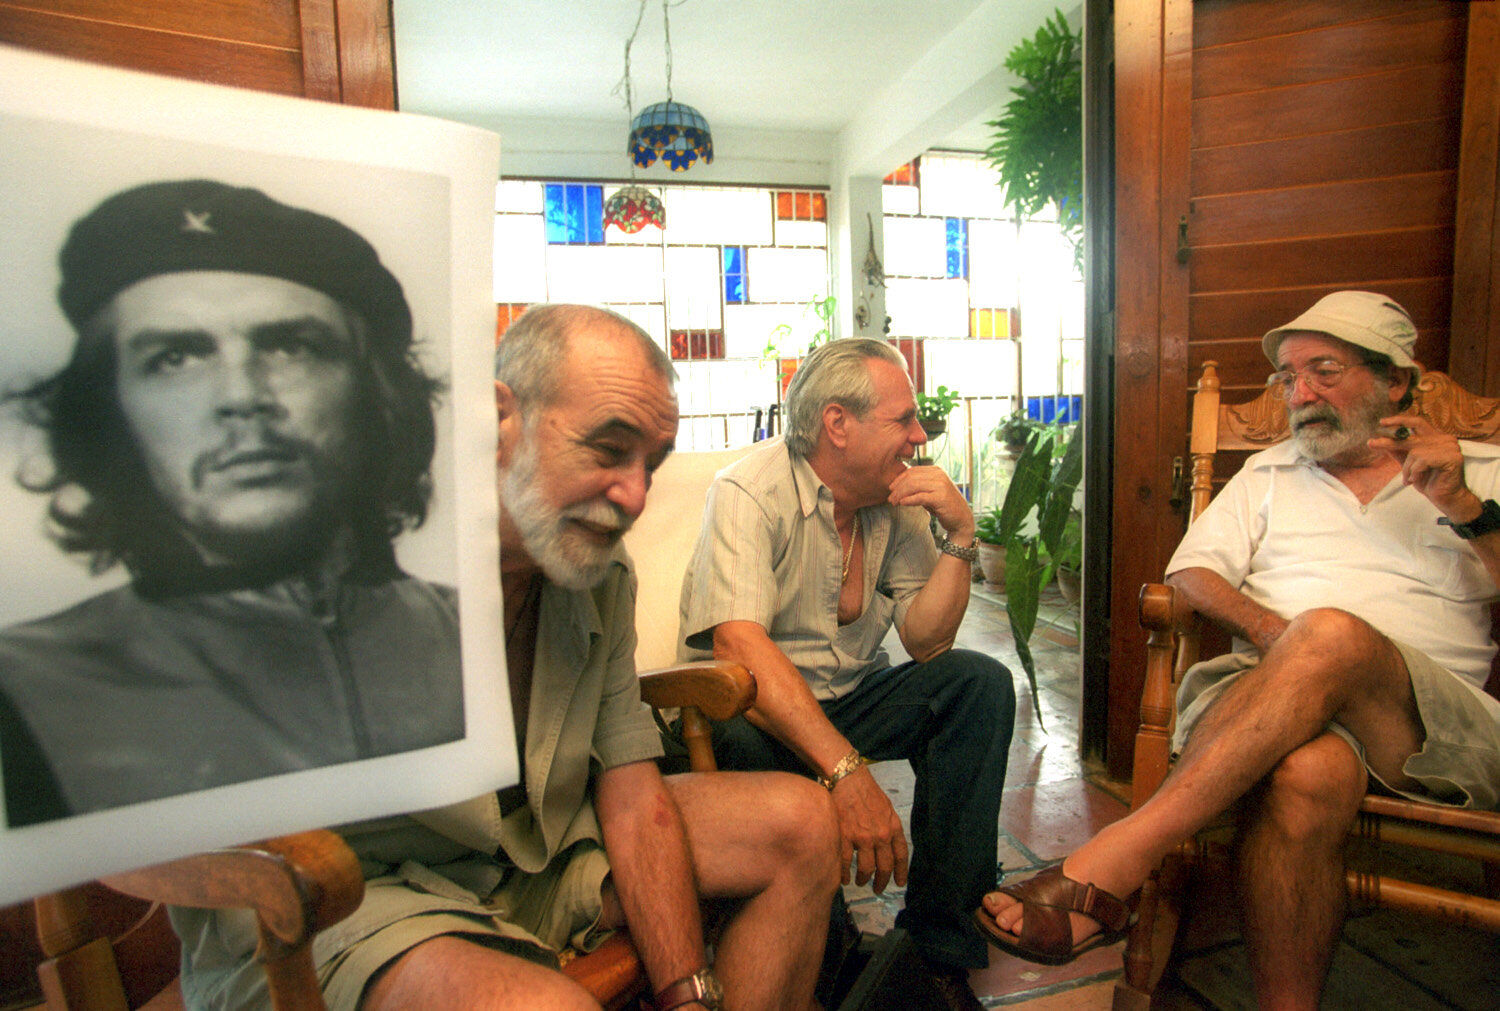  Korda holds his famous photo of Che Guevara.                      